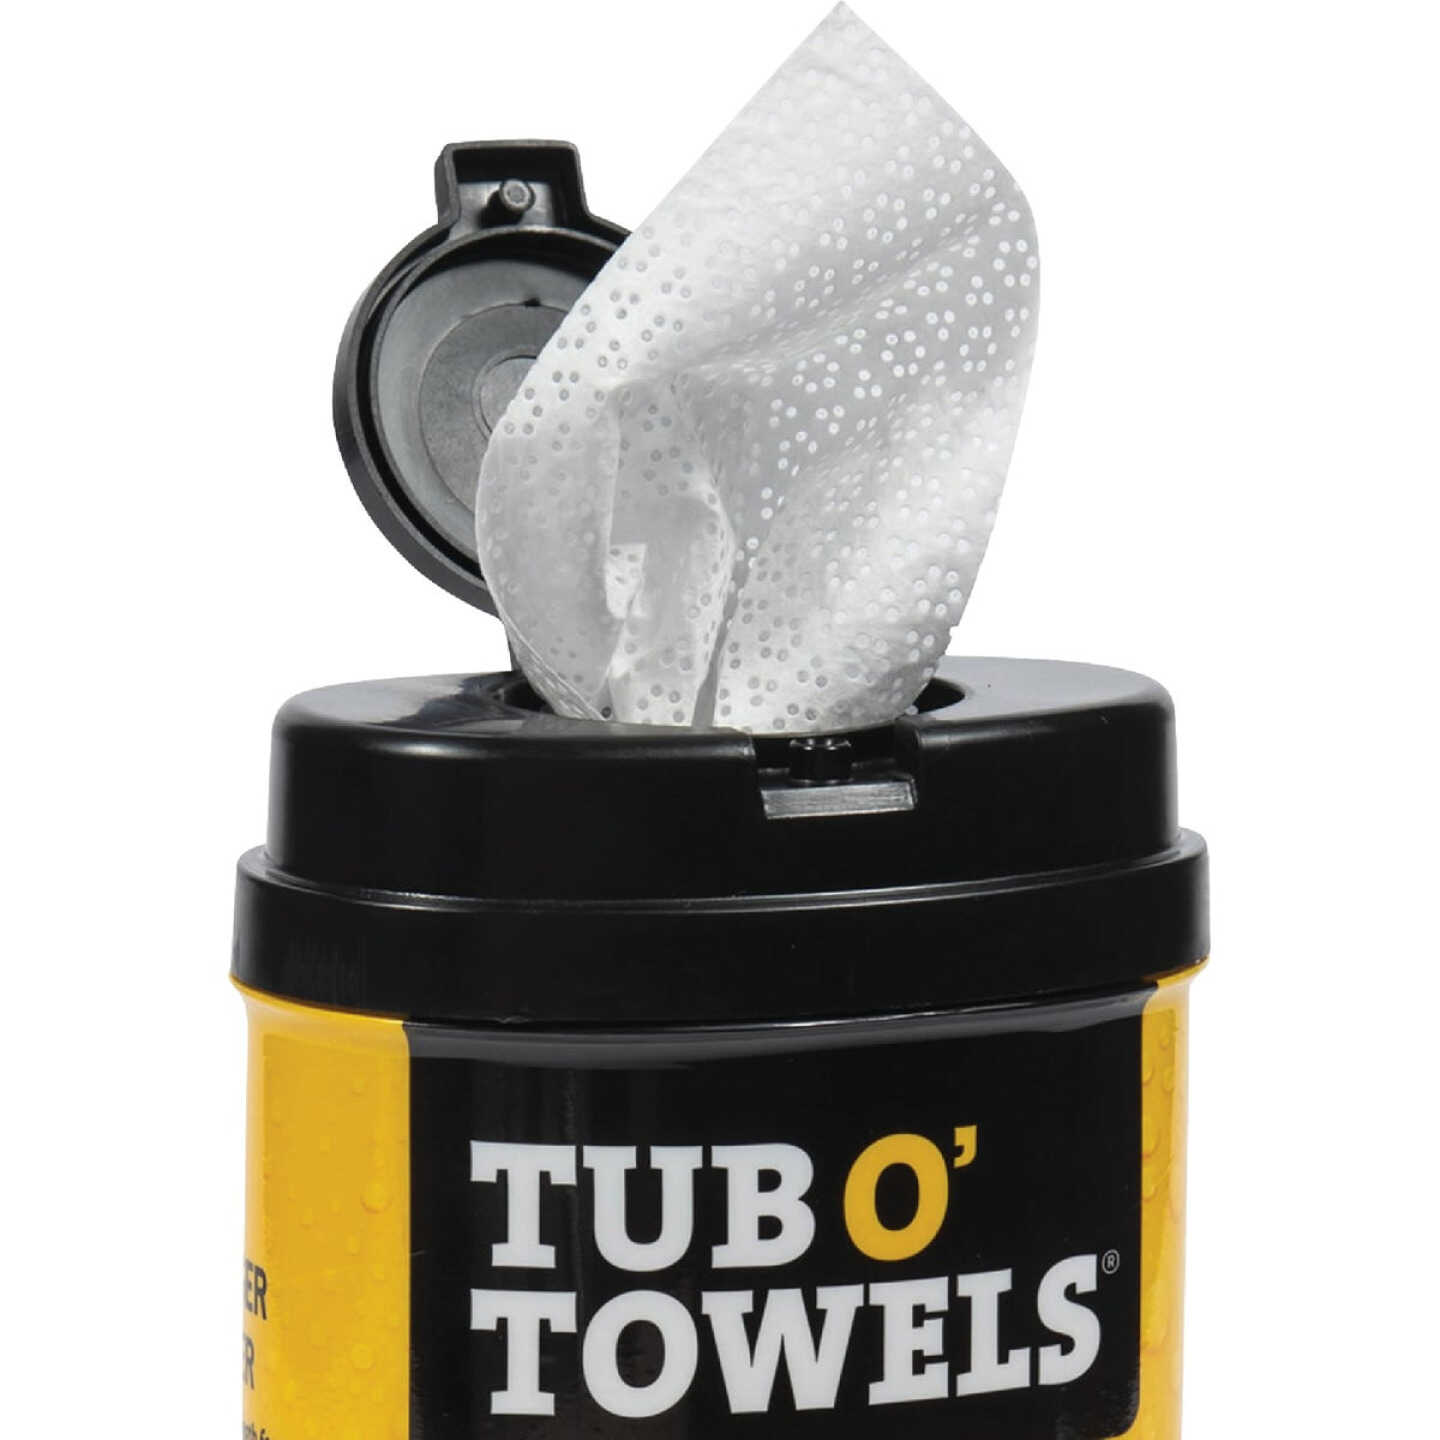 Tub O' Towels TW01-6 - 3 Pack Heavy Duty Multi-Surface Cleaning Wipes -  Resealable 